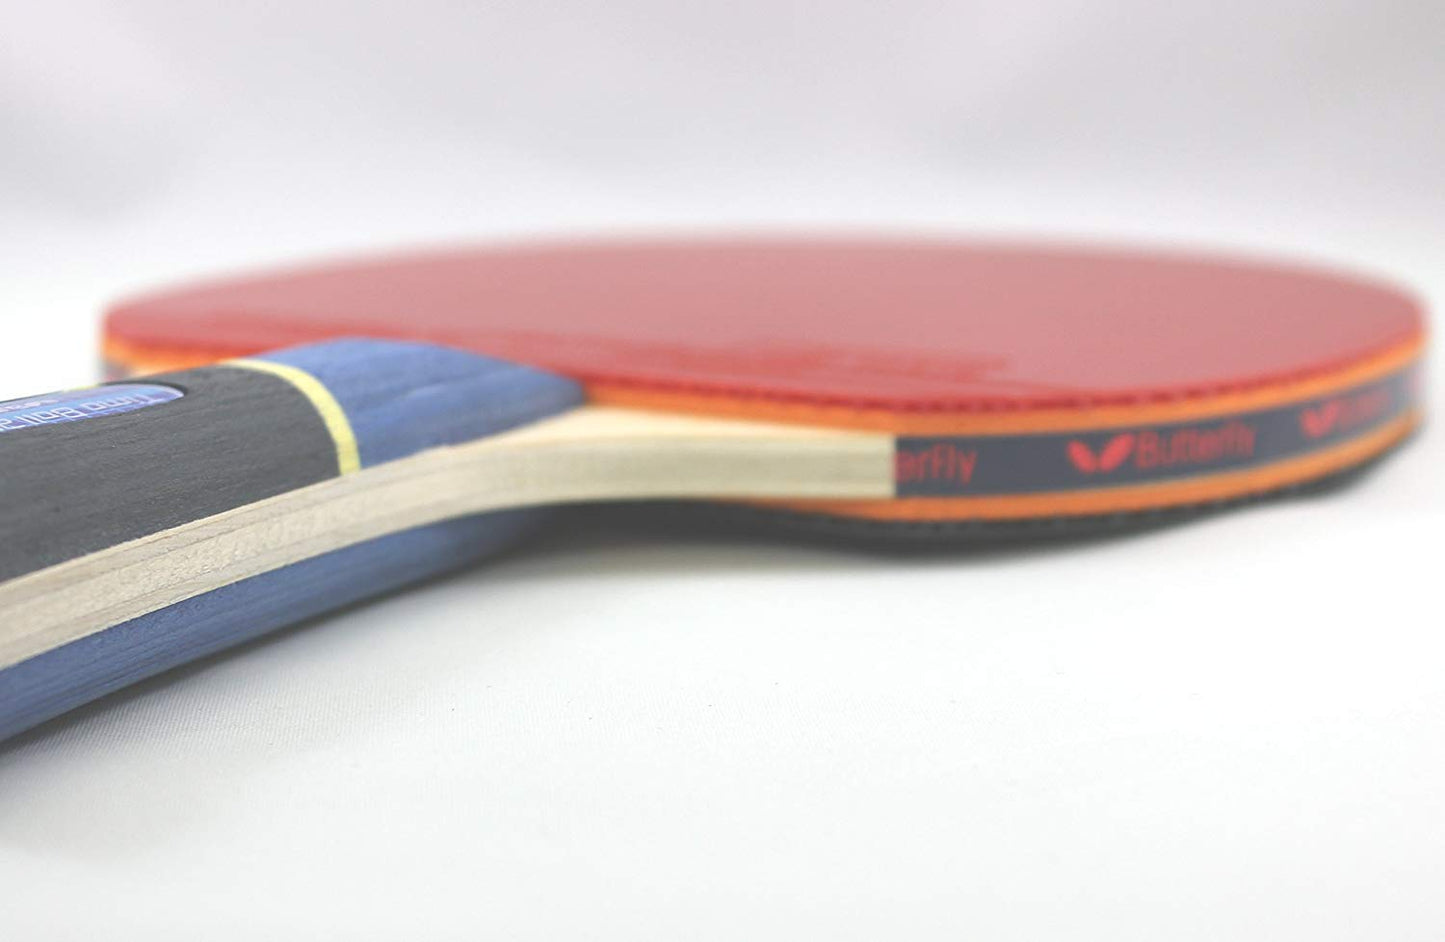 Butterfly Timo Boll 2000 Table Tennis Bat With 2 Balls - Best Price online Prokicksports.com